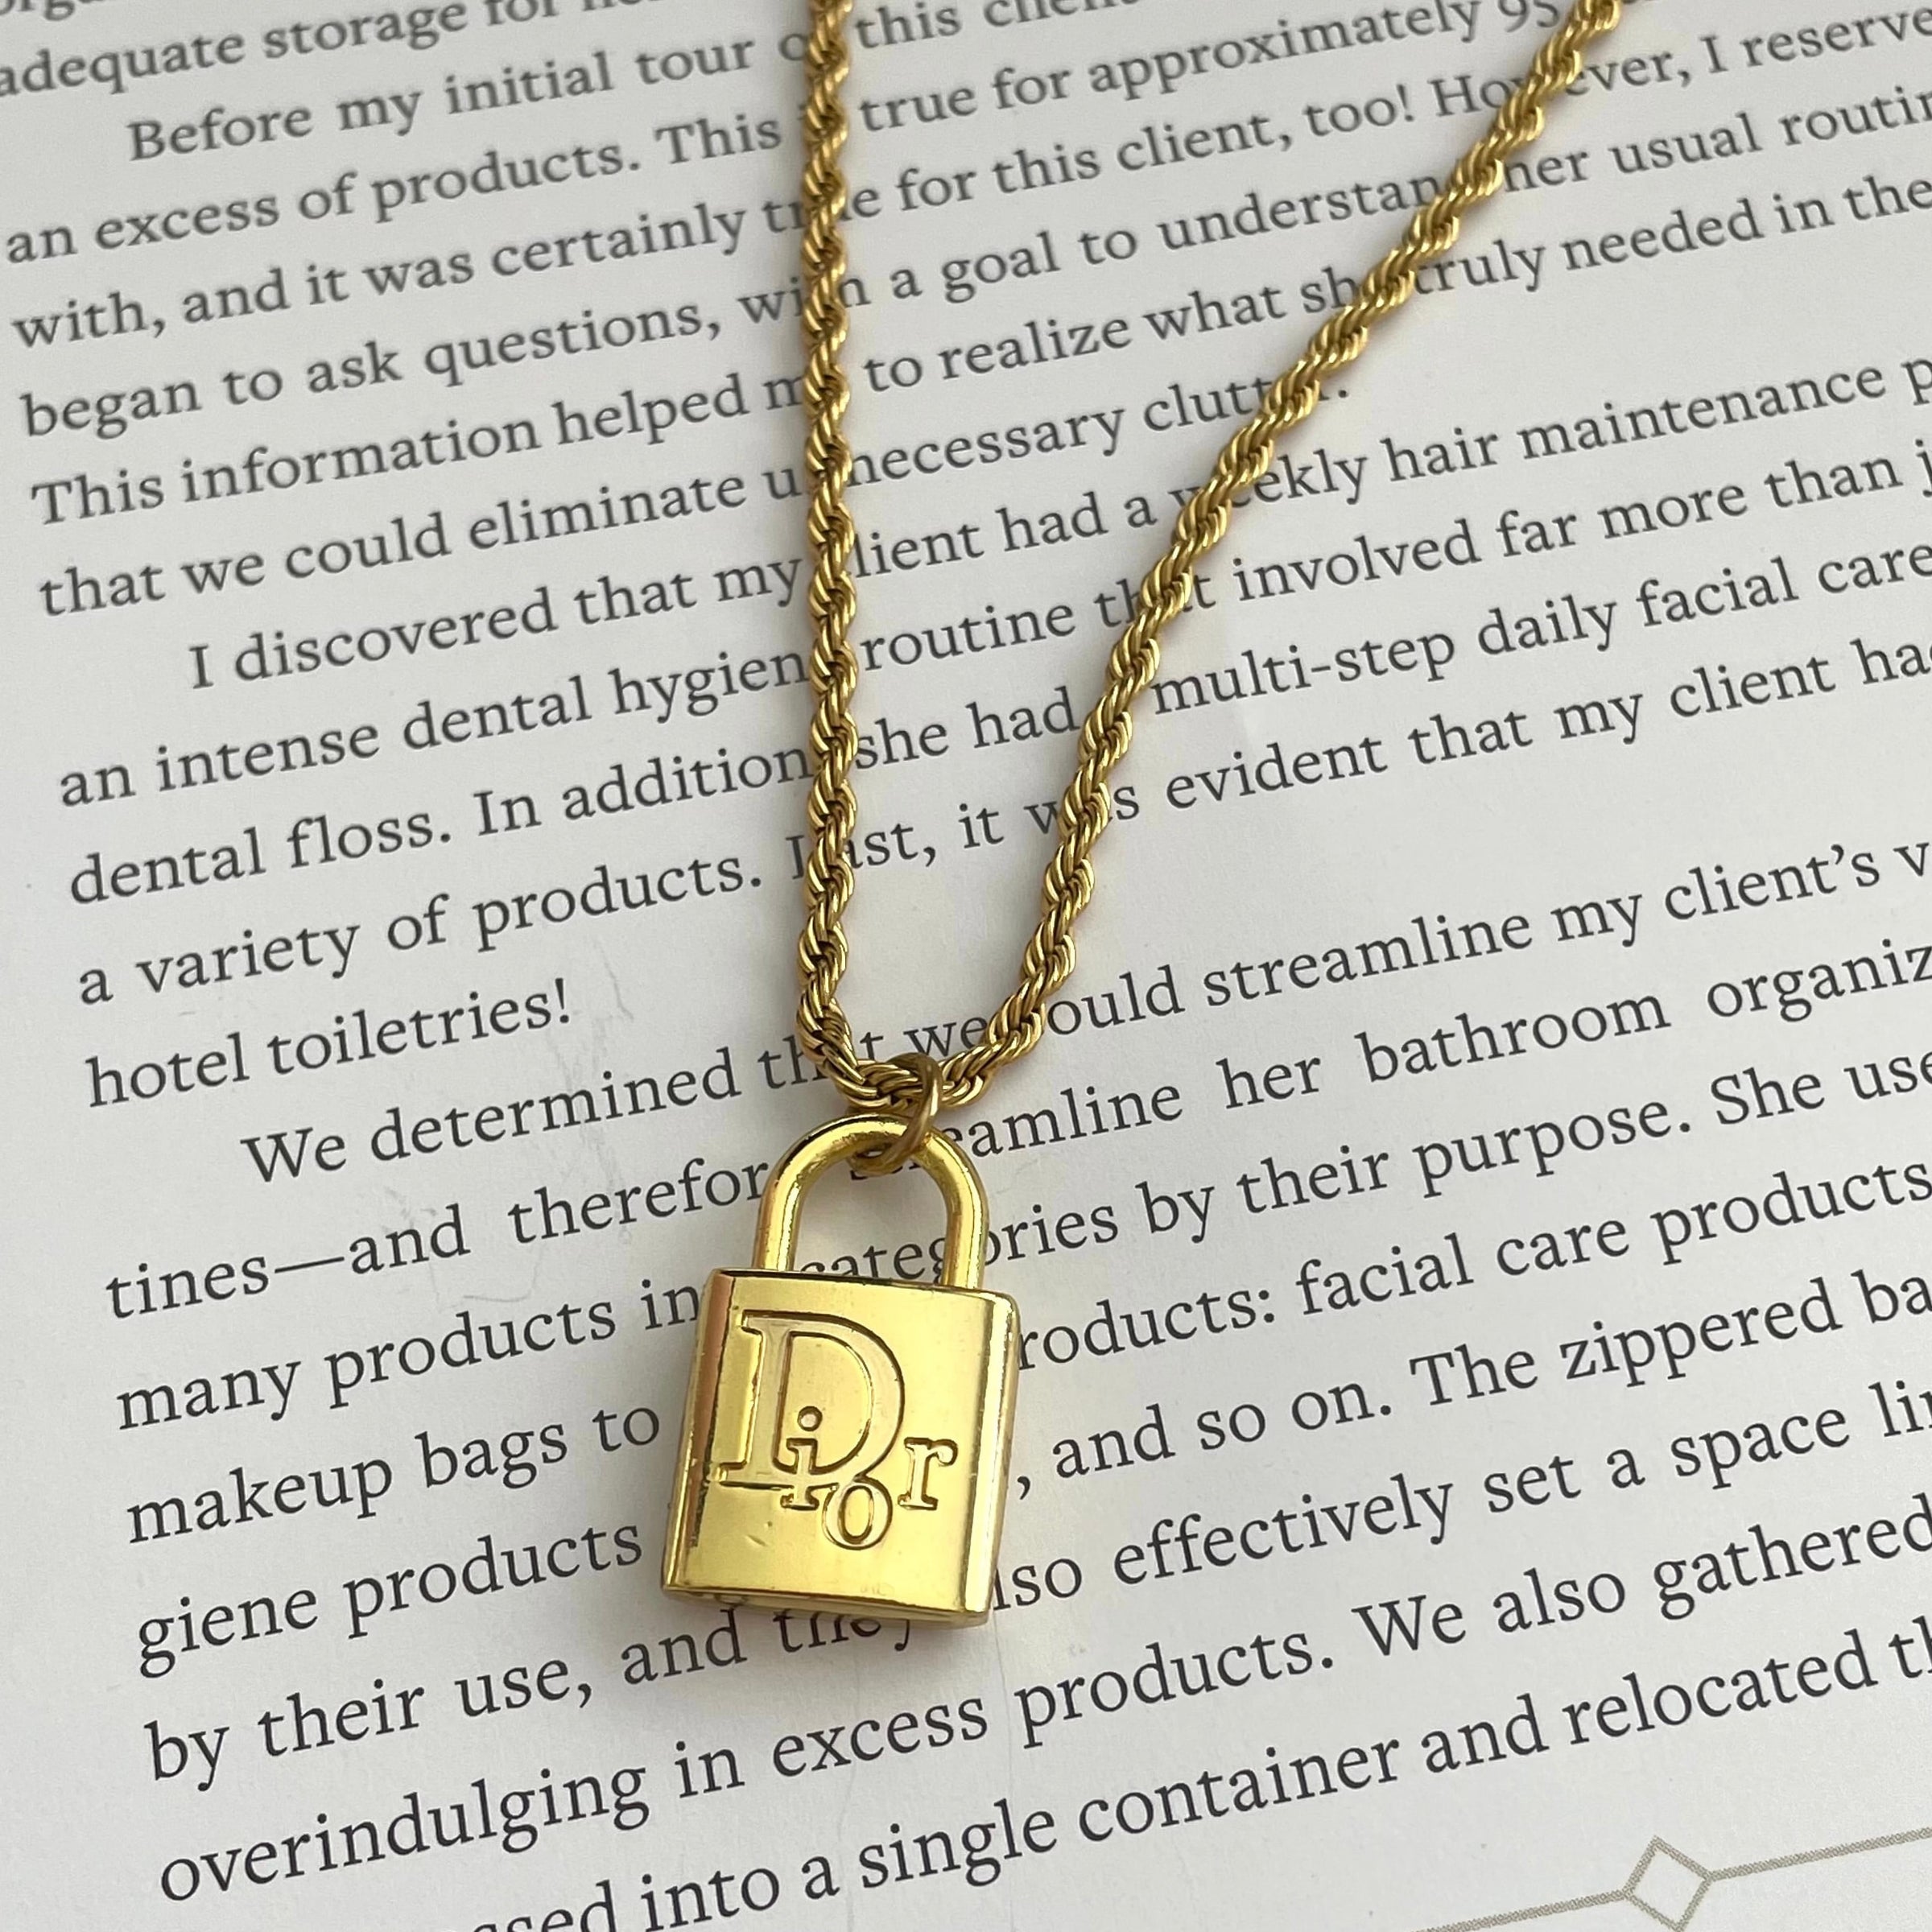 Repurposed Louis Vuitton Red Lock necklace - Dreamized